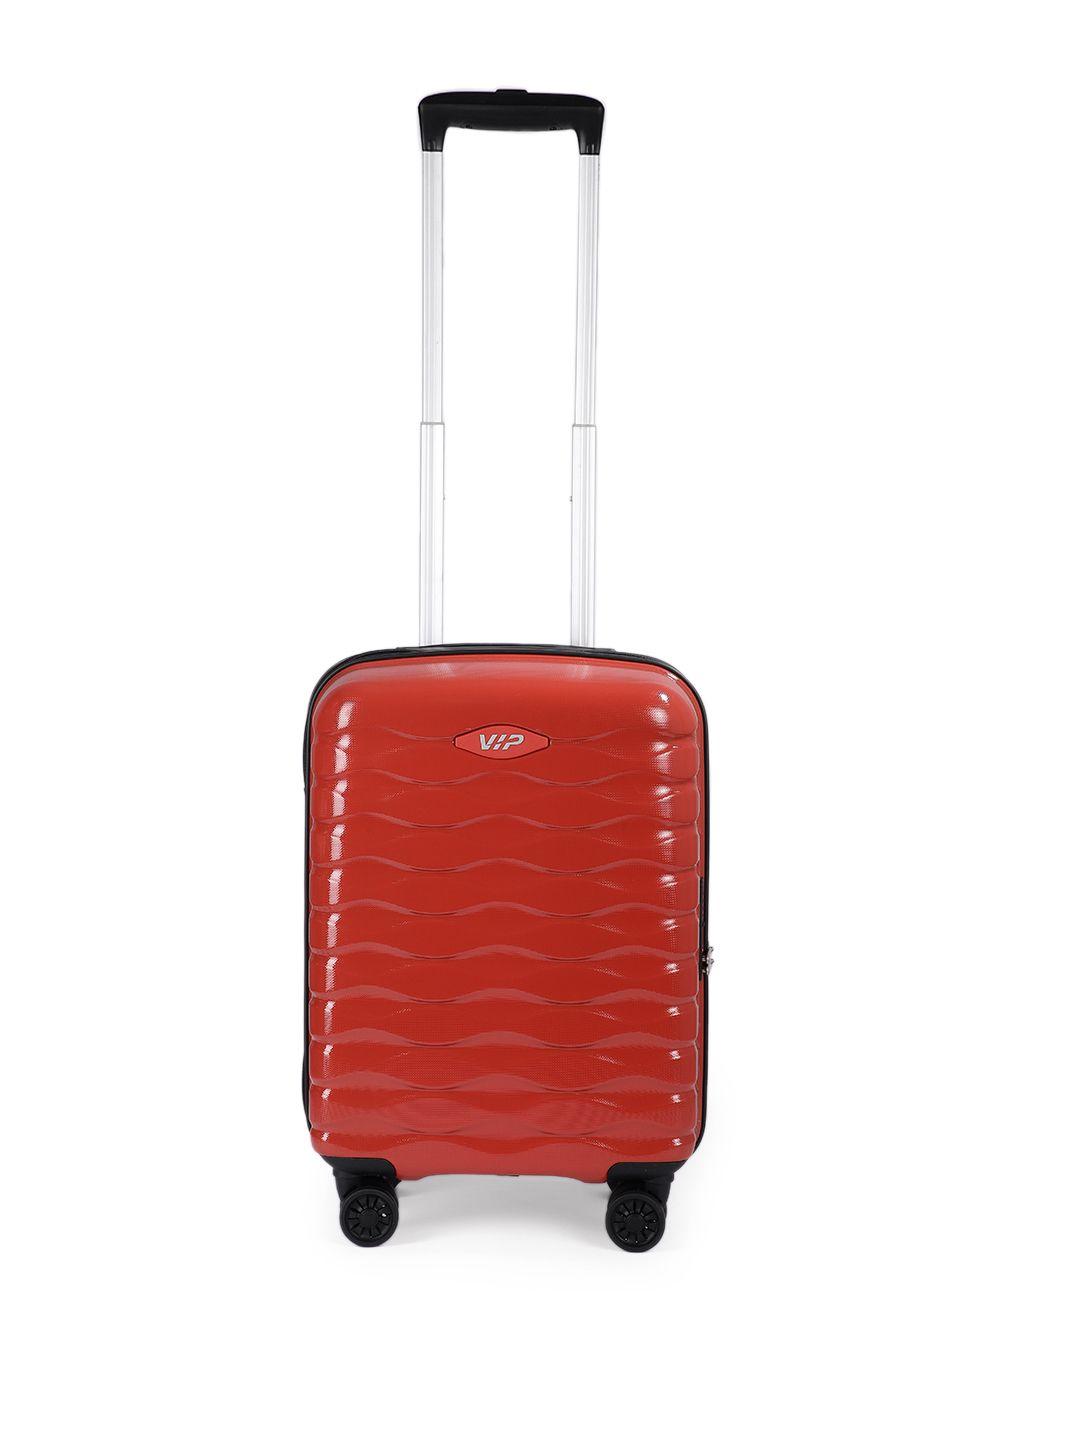 vip red small foxtrot trolley suitcase